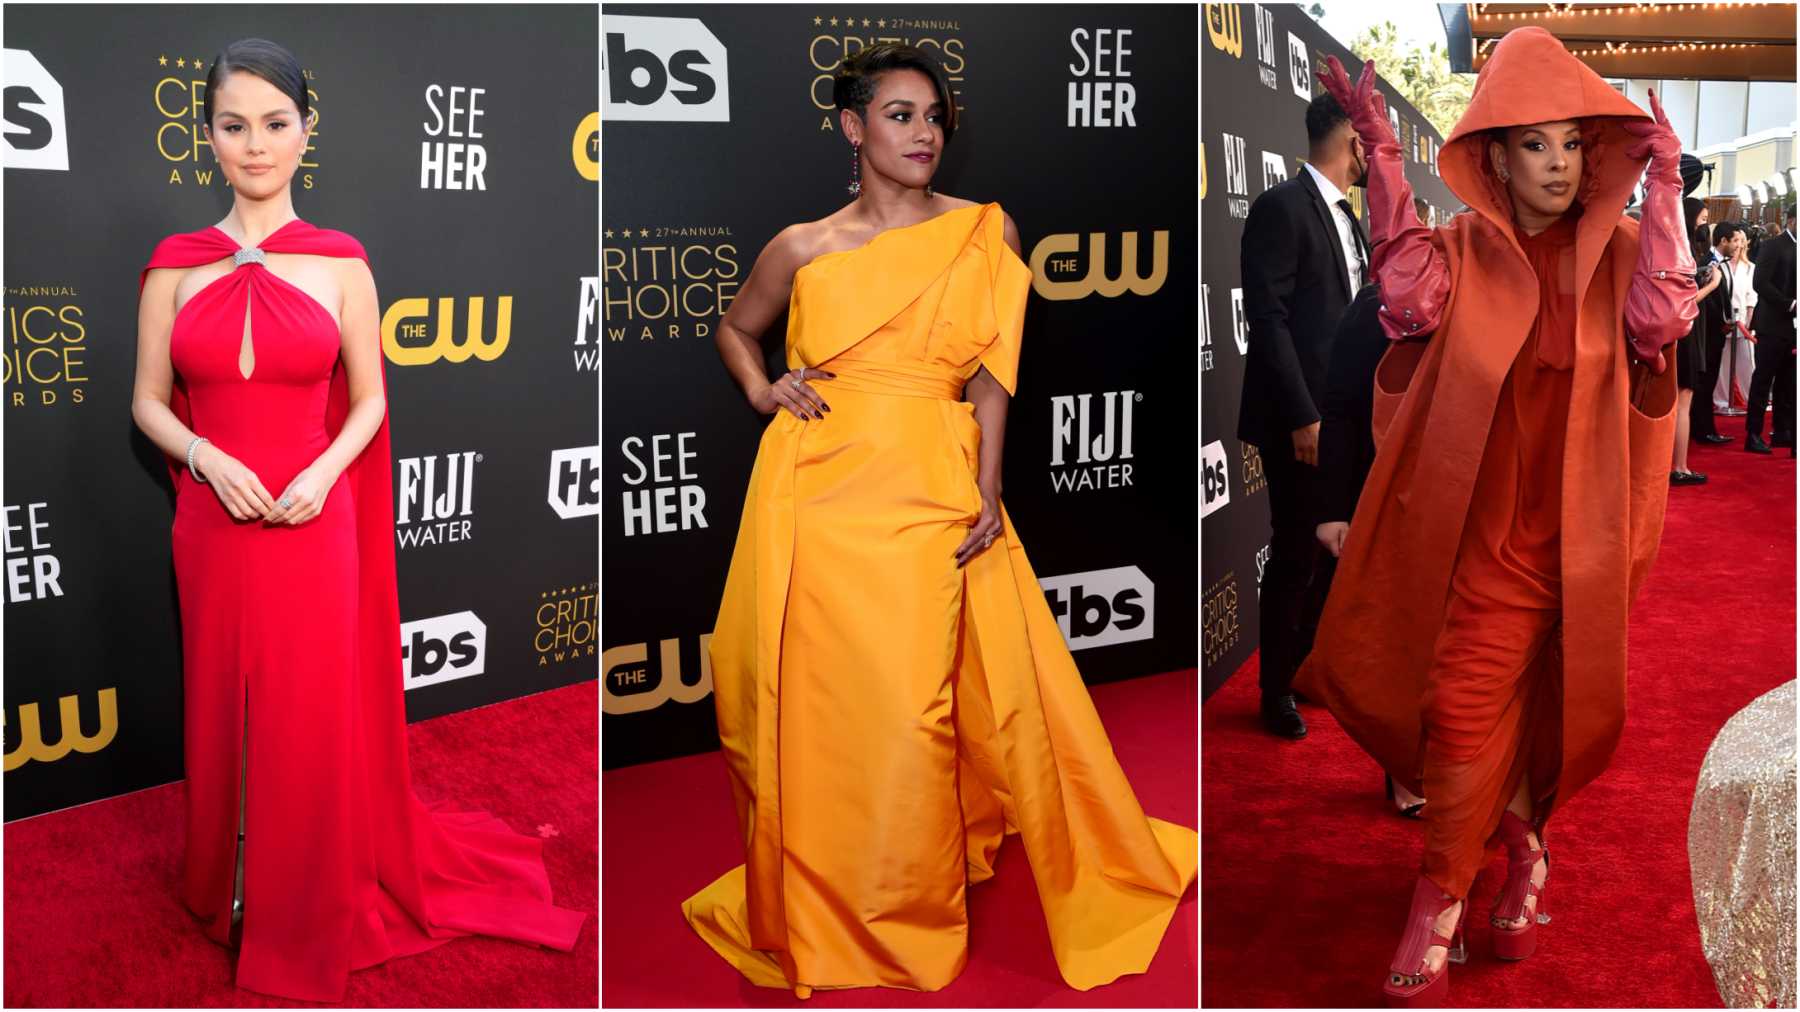 The Best Red Carpet Style at the 2022 Critics Choice Awards